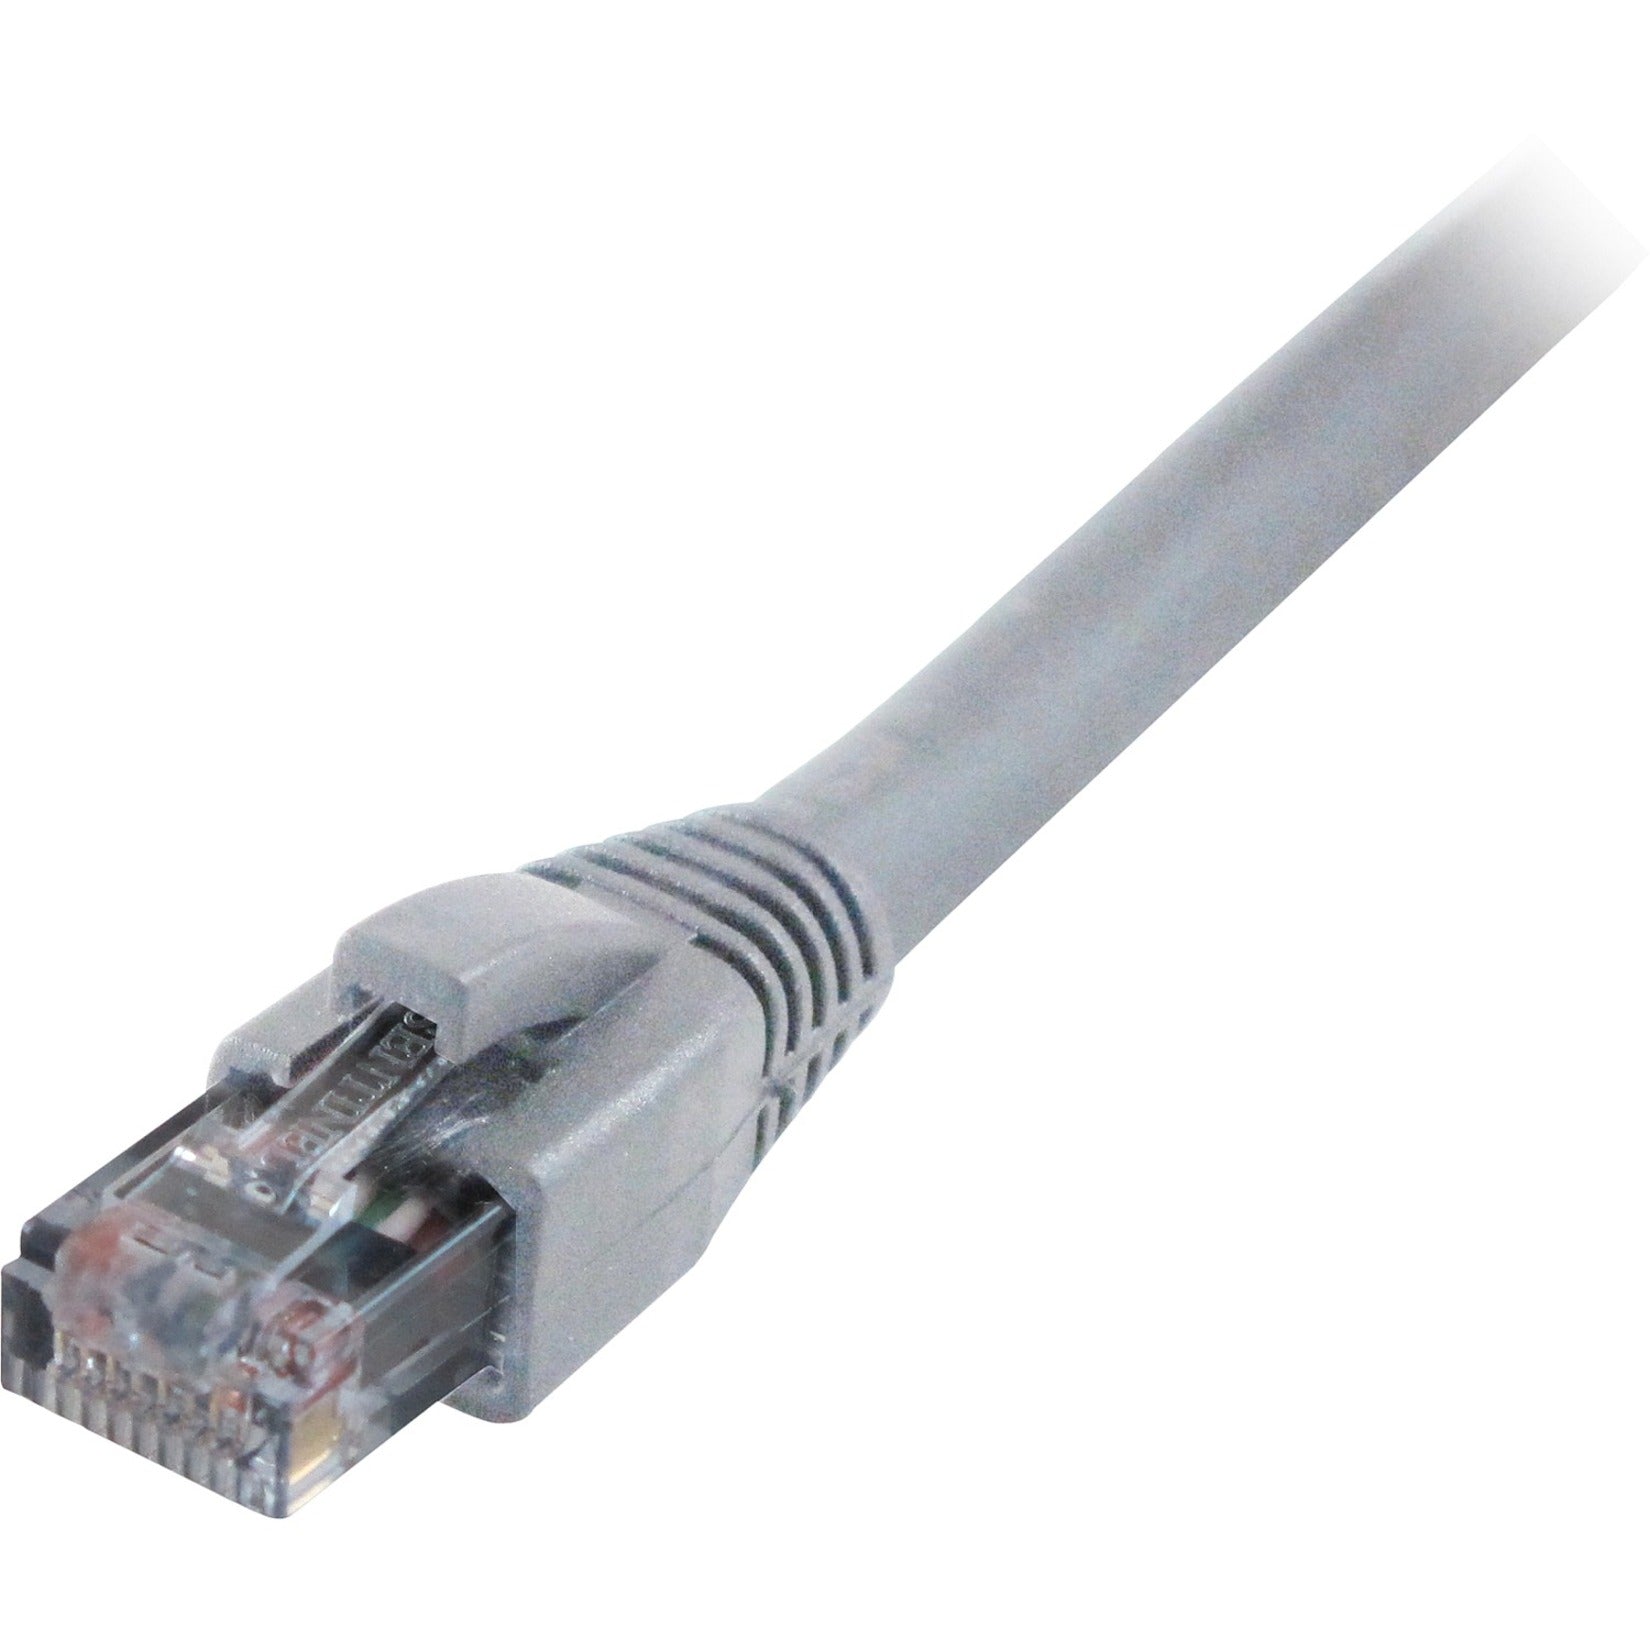 Comprehensive CAT5-350-25GRY Cat5e 350 Mhz Snagless Patch Cable 25ft Gray, Molded, Strain Relief, Stranded, Booted, 1 Gbit/s Data Transfer Rate